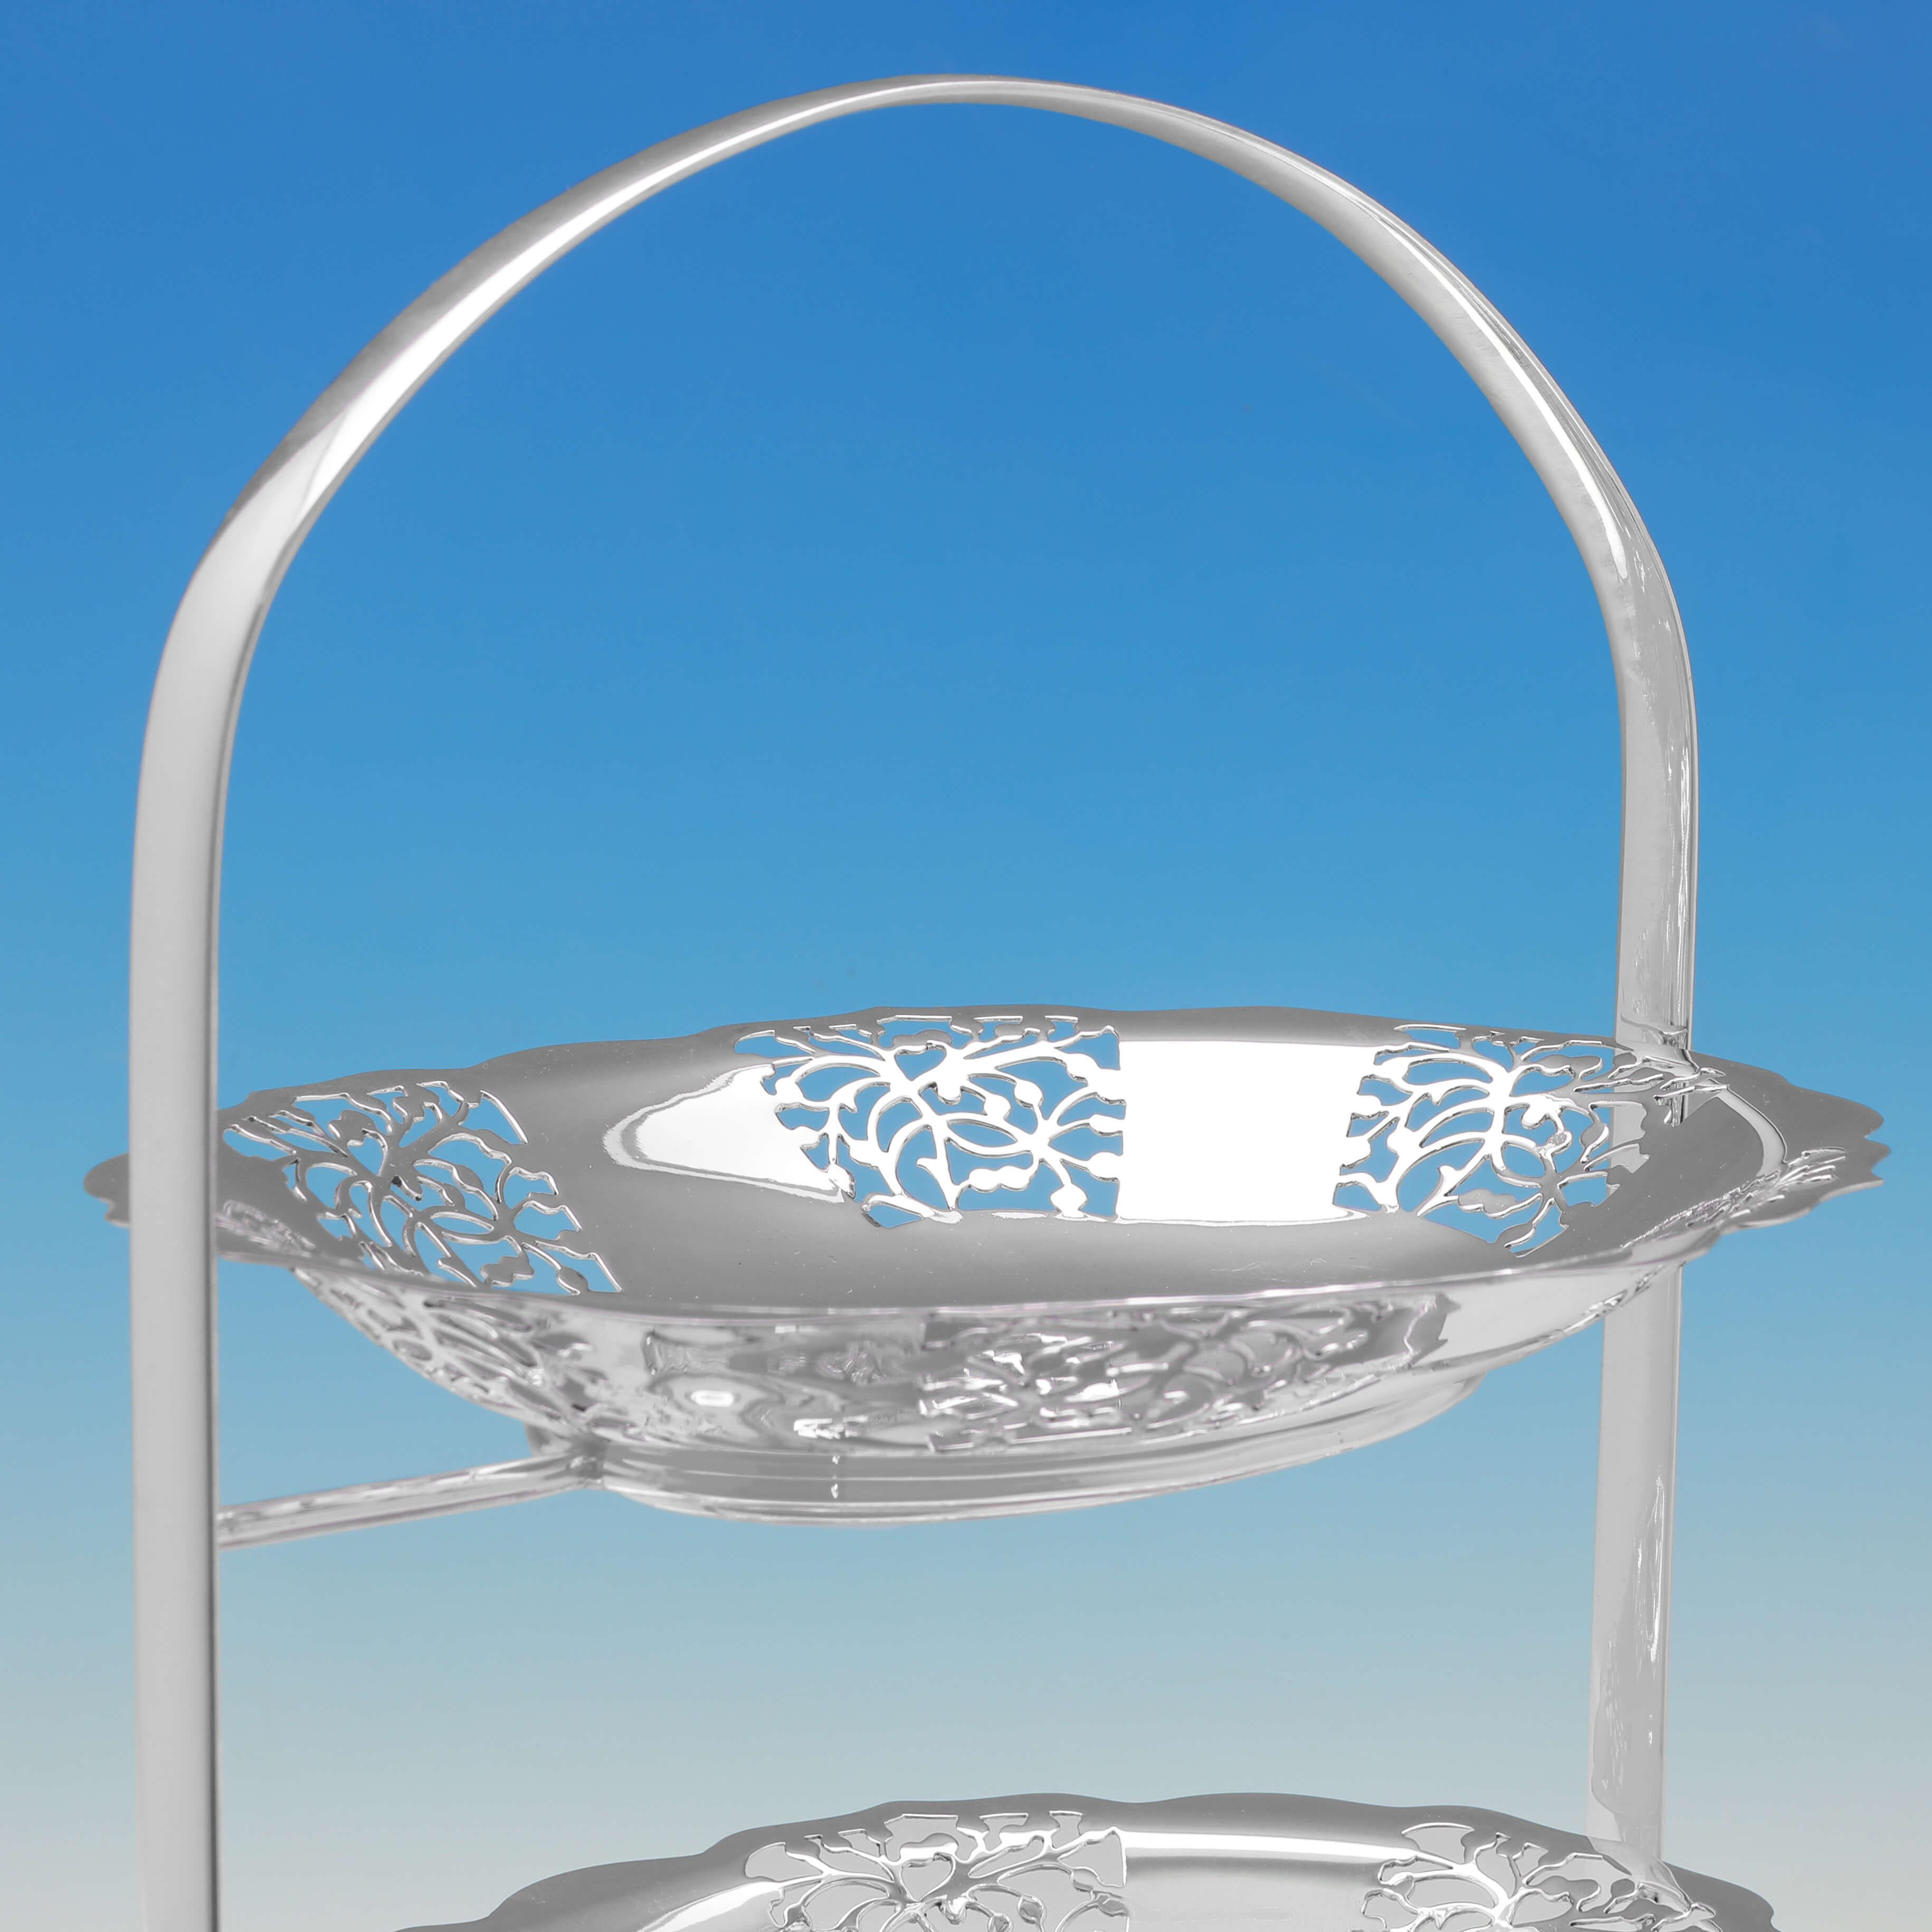 silver plated cake stand